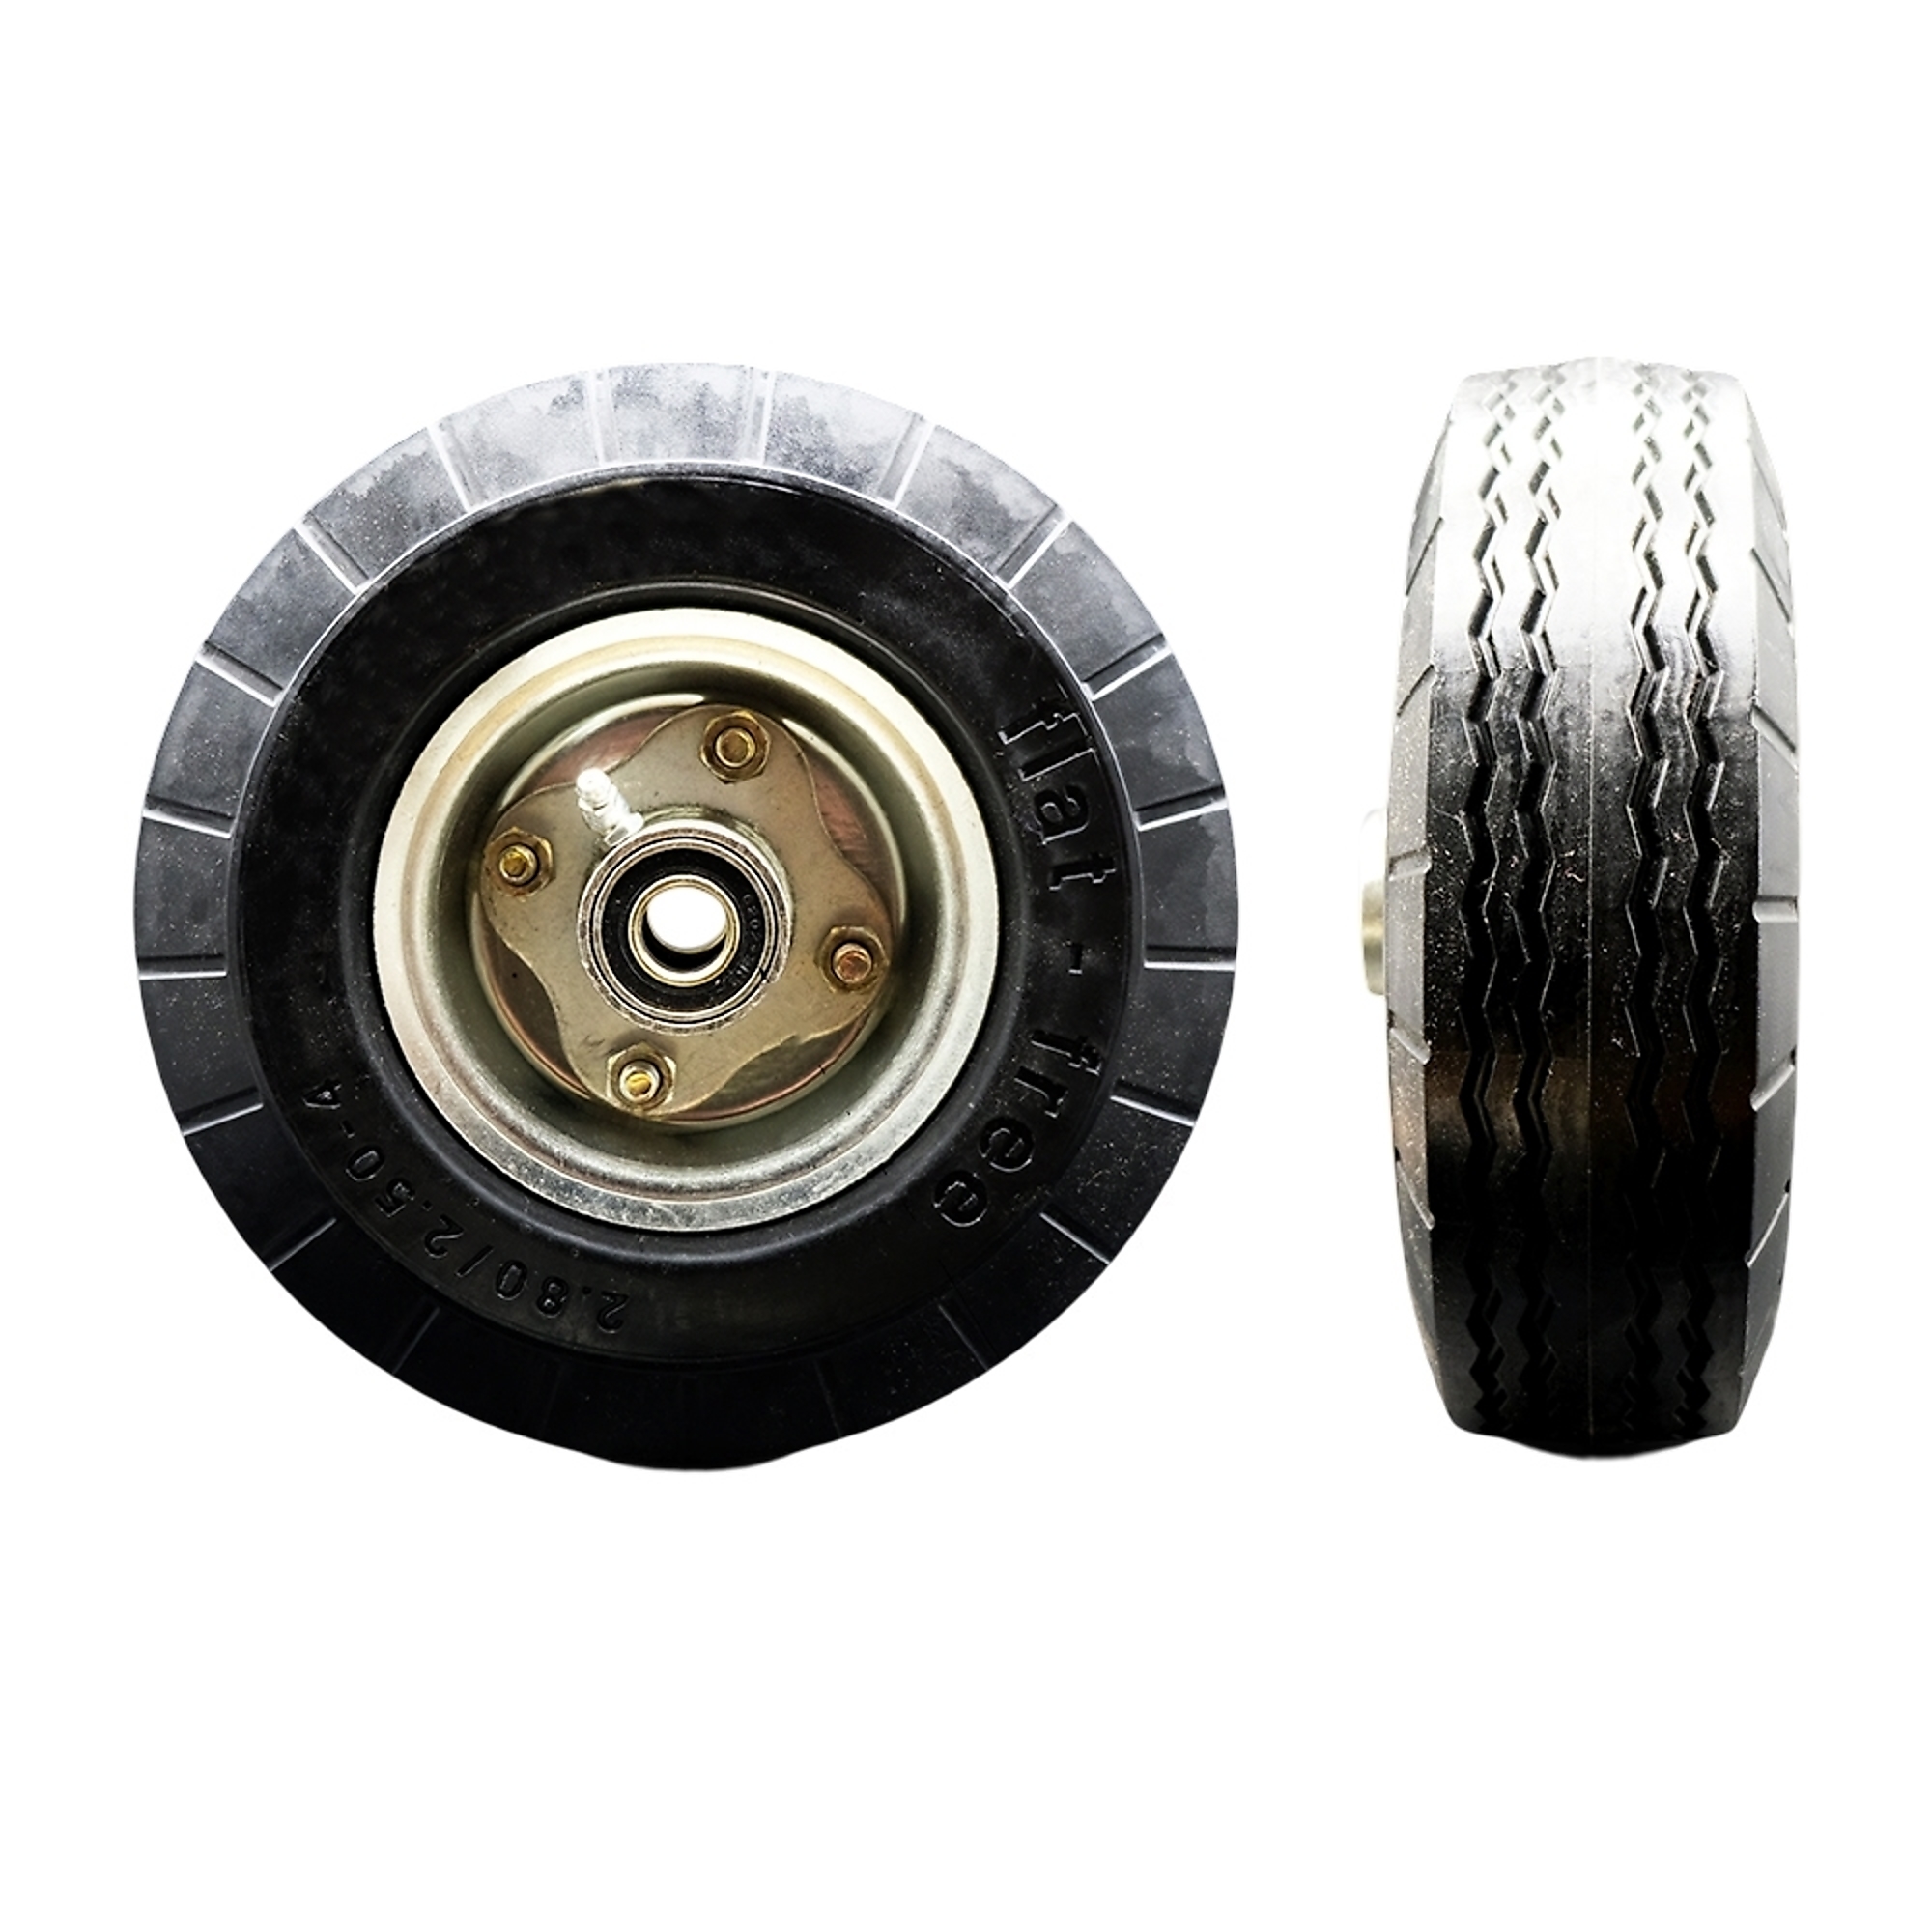 6 in. Semi-Solid Tire with Polypropylene Hub